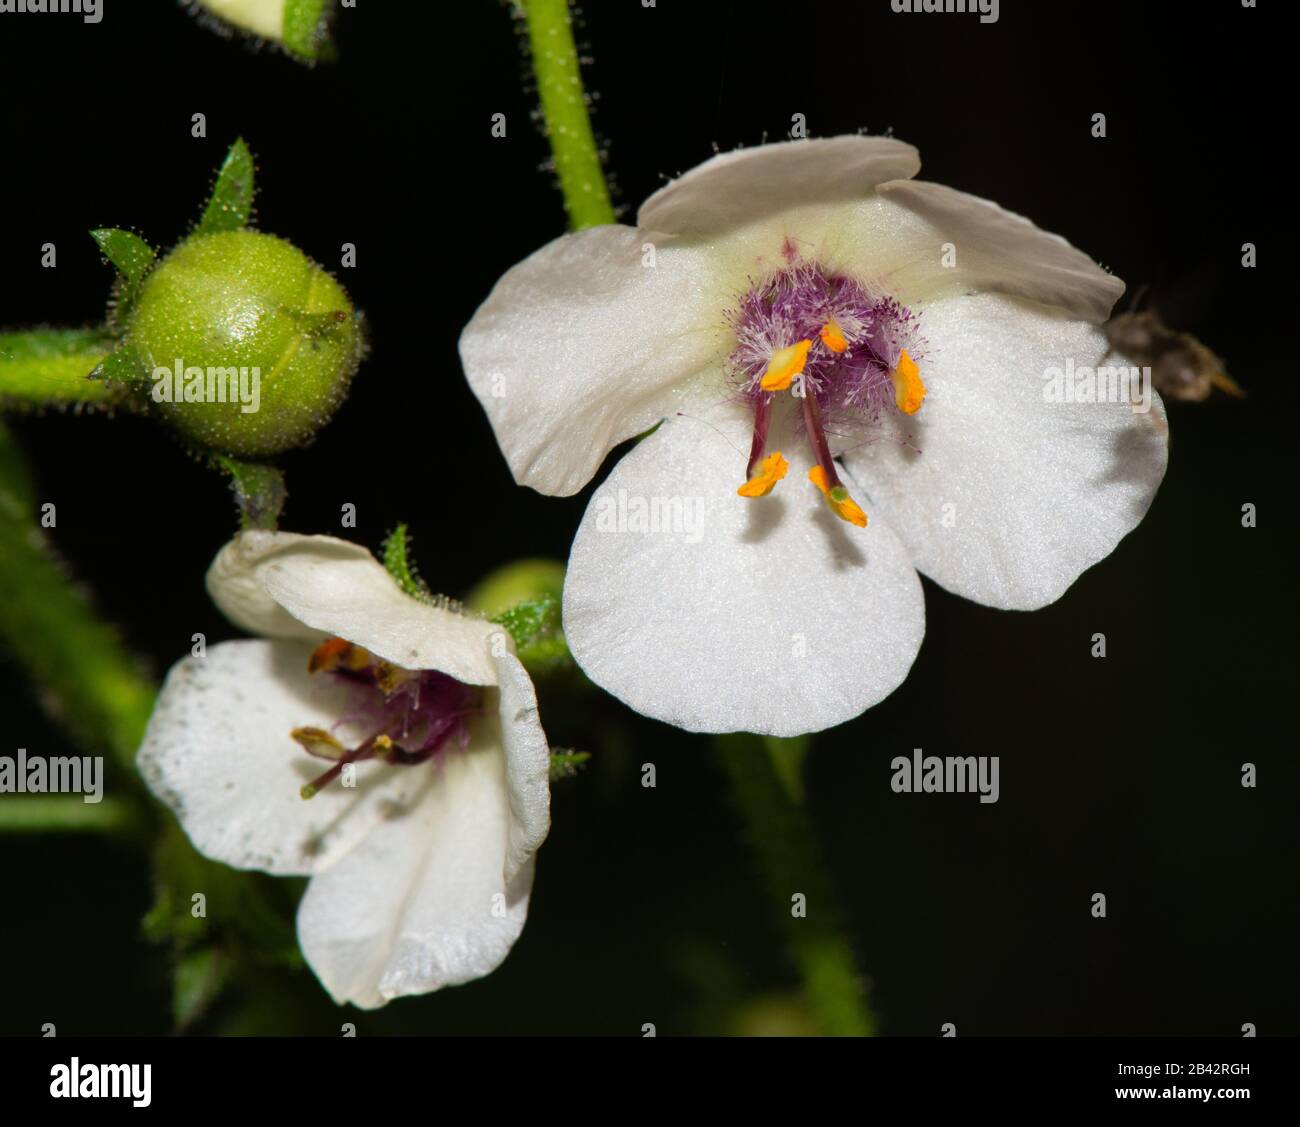 Closeup of white flower blossoms of a Moth Mullein (Verbascum blattaria) wildflower with a black background Stock Photo